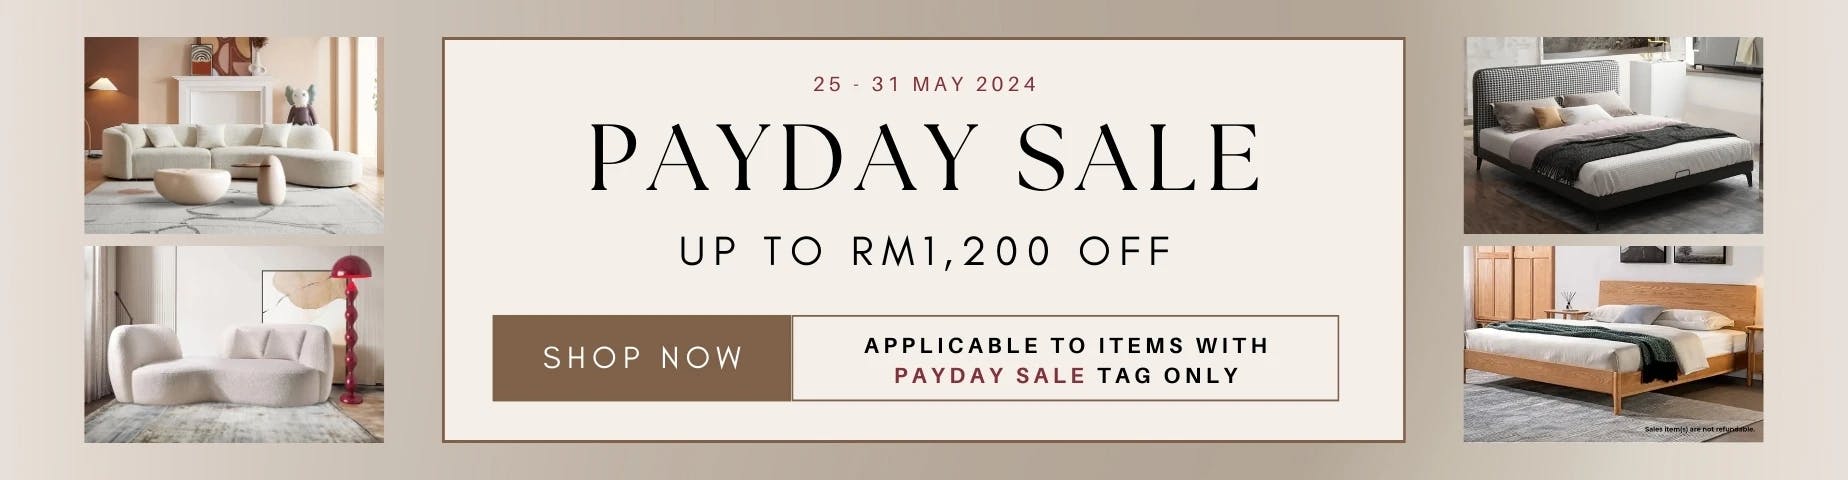 Payday Sale Up to RM1,200